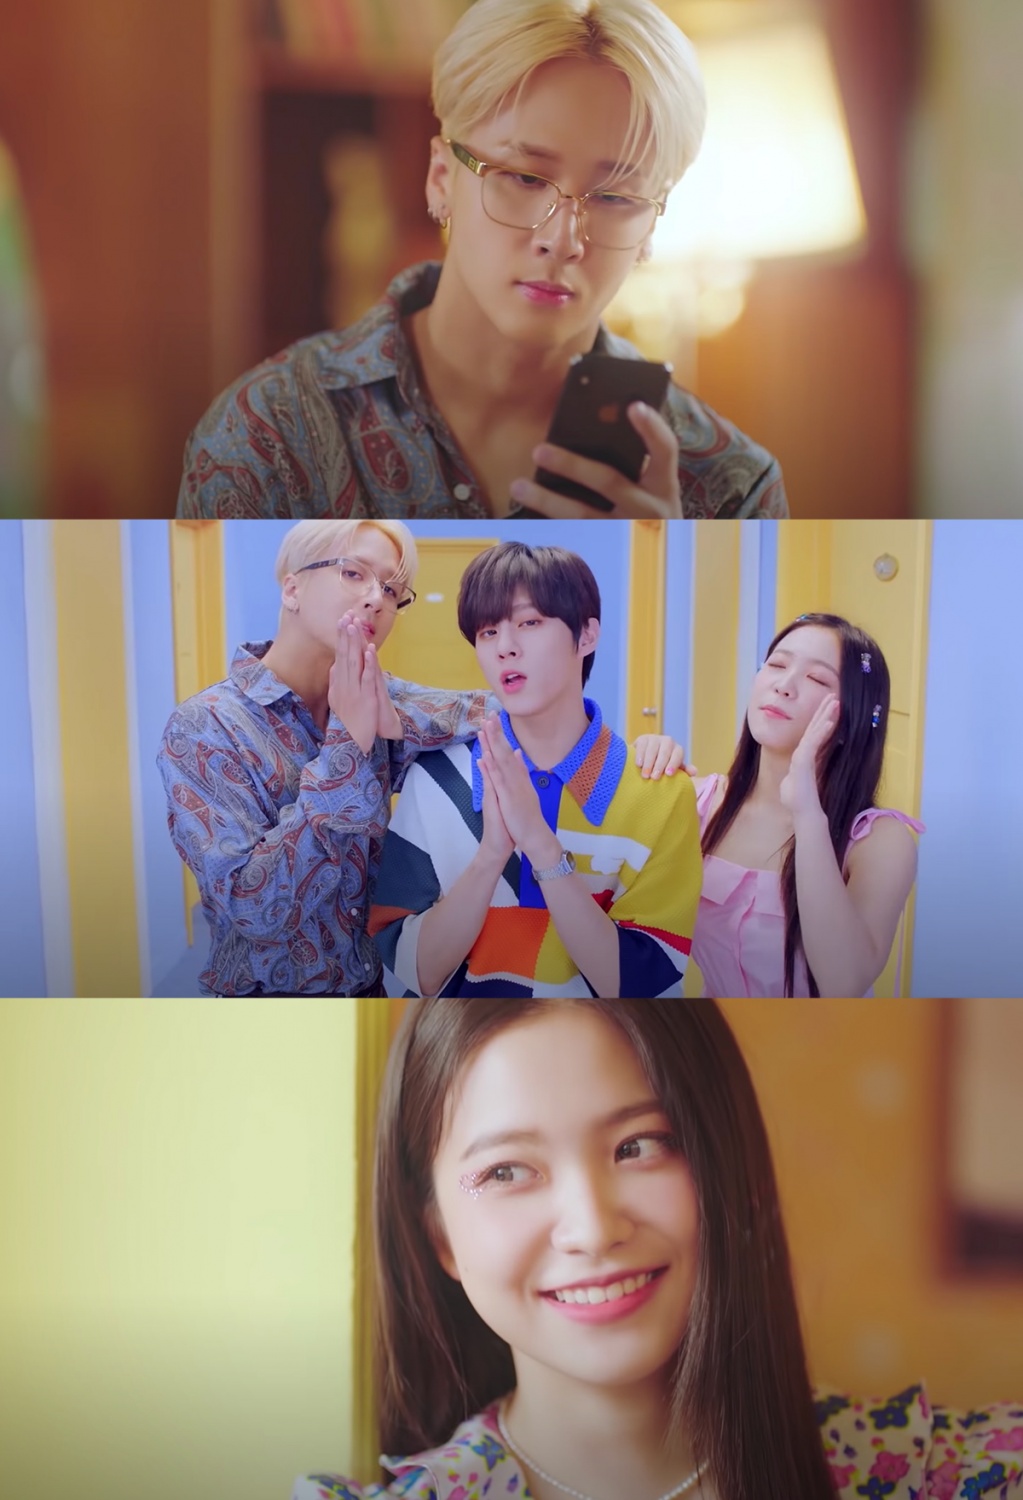 WATCH: Red Velvet Yeri, VIXX Ravi, and UP10TION Kim Woo Seok Join Together in The Remake of "Sorrow"